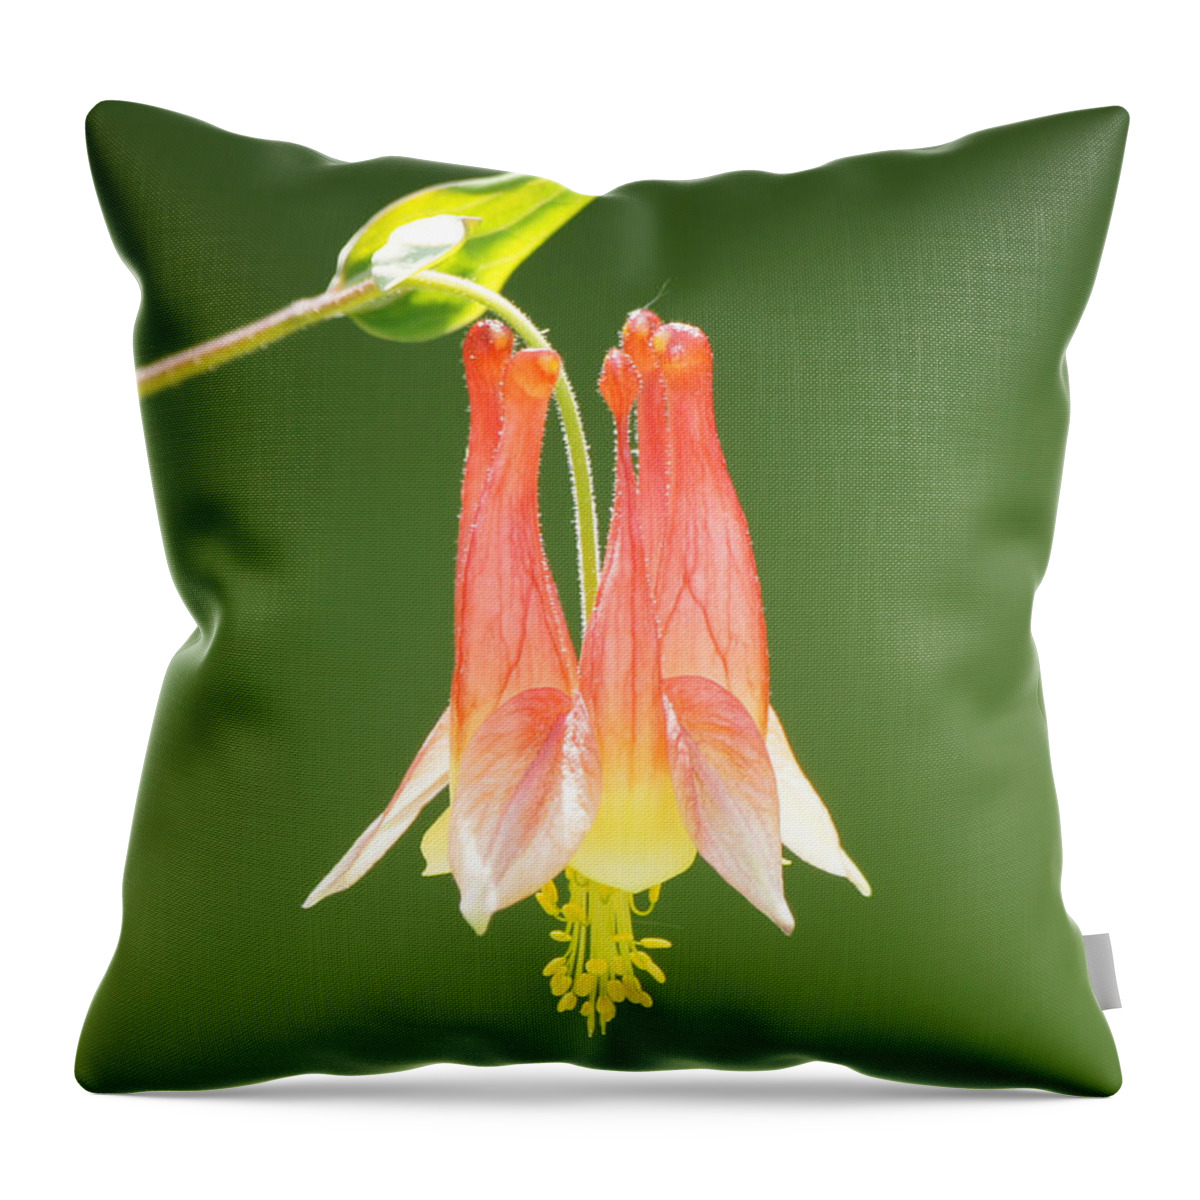 Columbine Flower In Sunlight Throw Pillow featuring the photograph Columbine Flower in Sunlight by Robert E Alter Reflections of Infinity